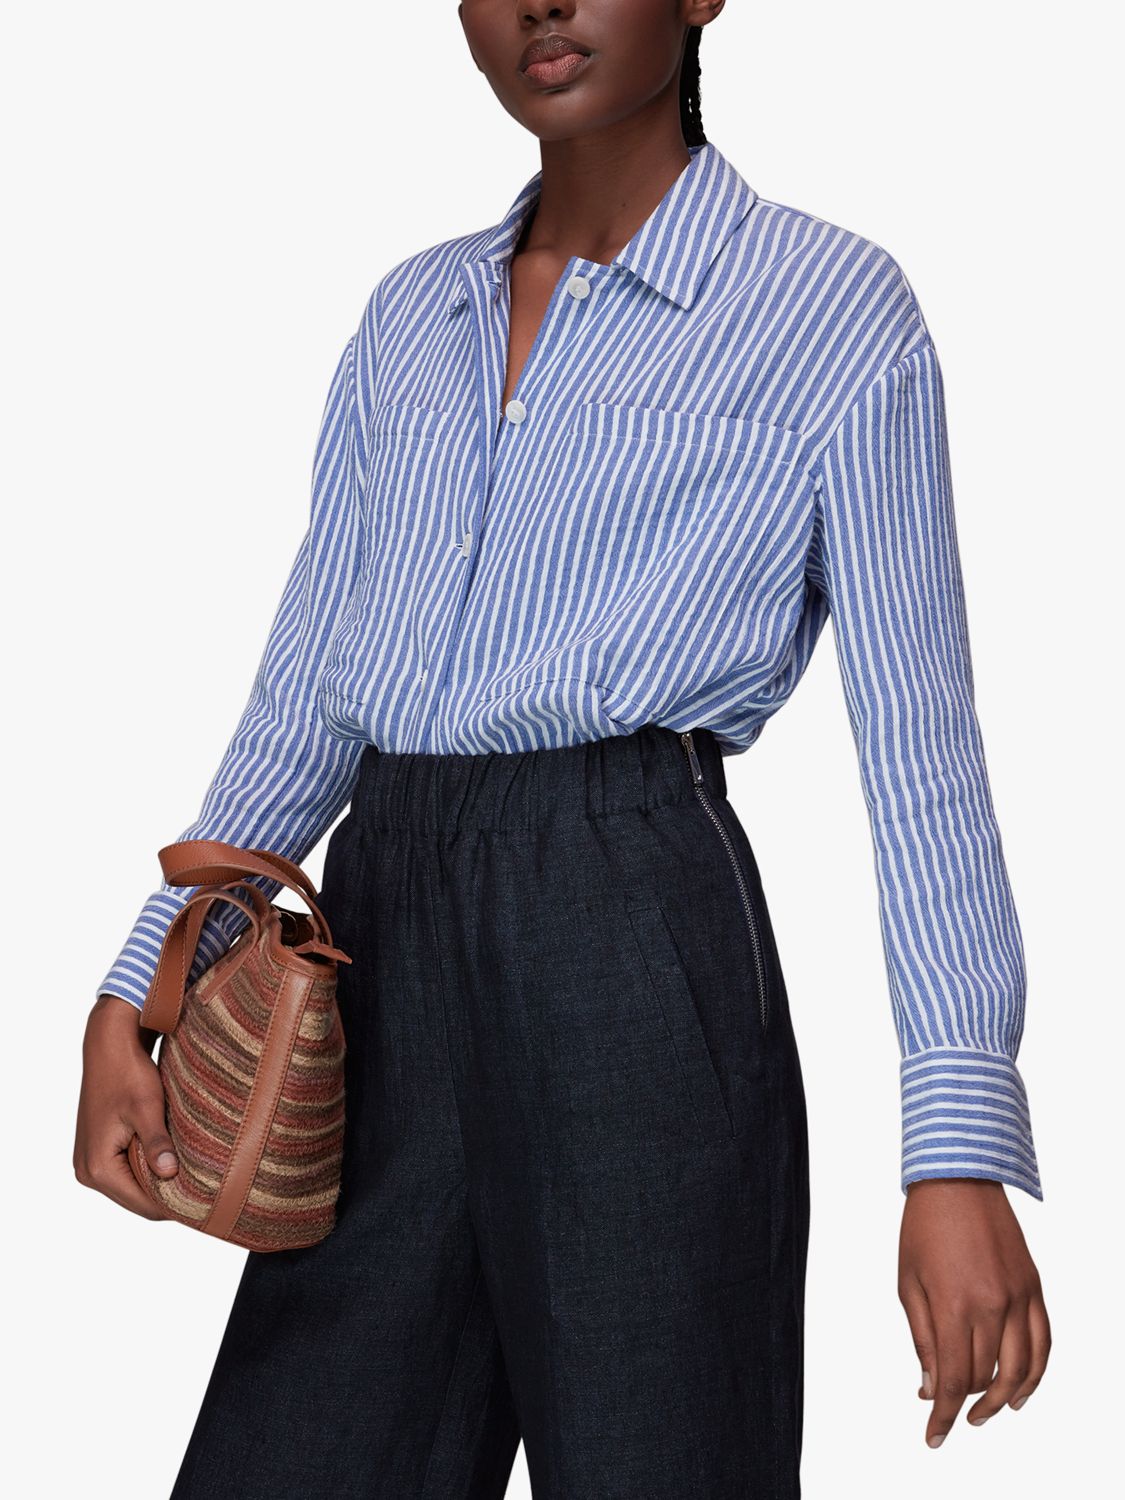 Whistles Linen Trousers, Navy at John Lewis & Partners